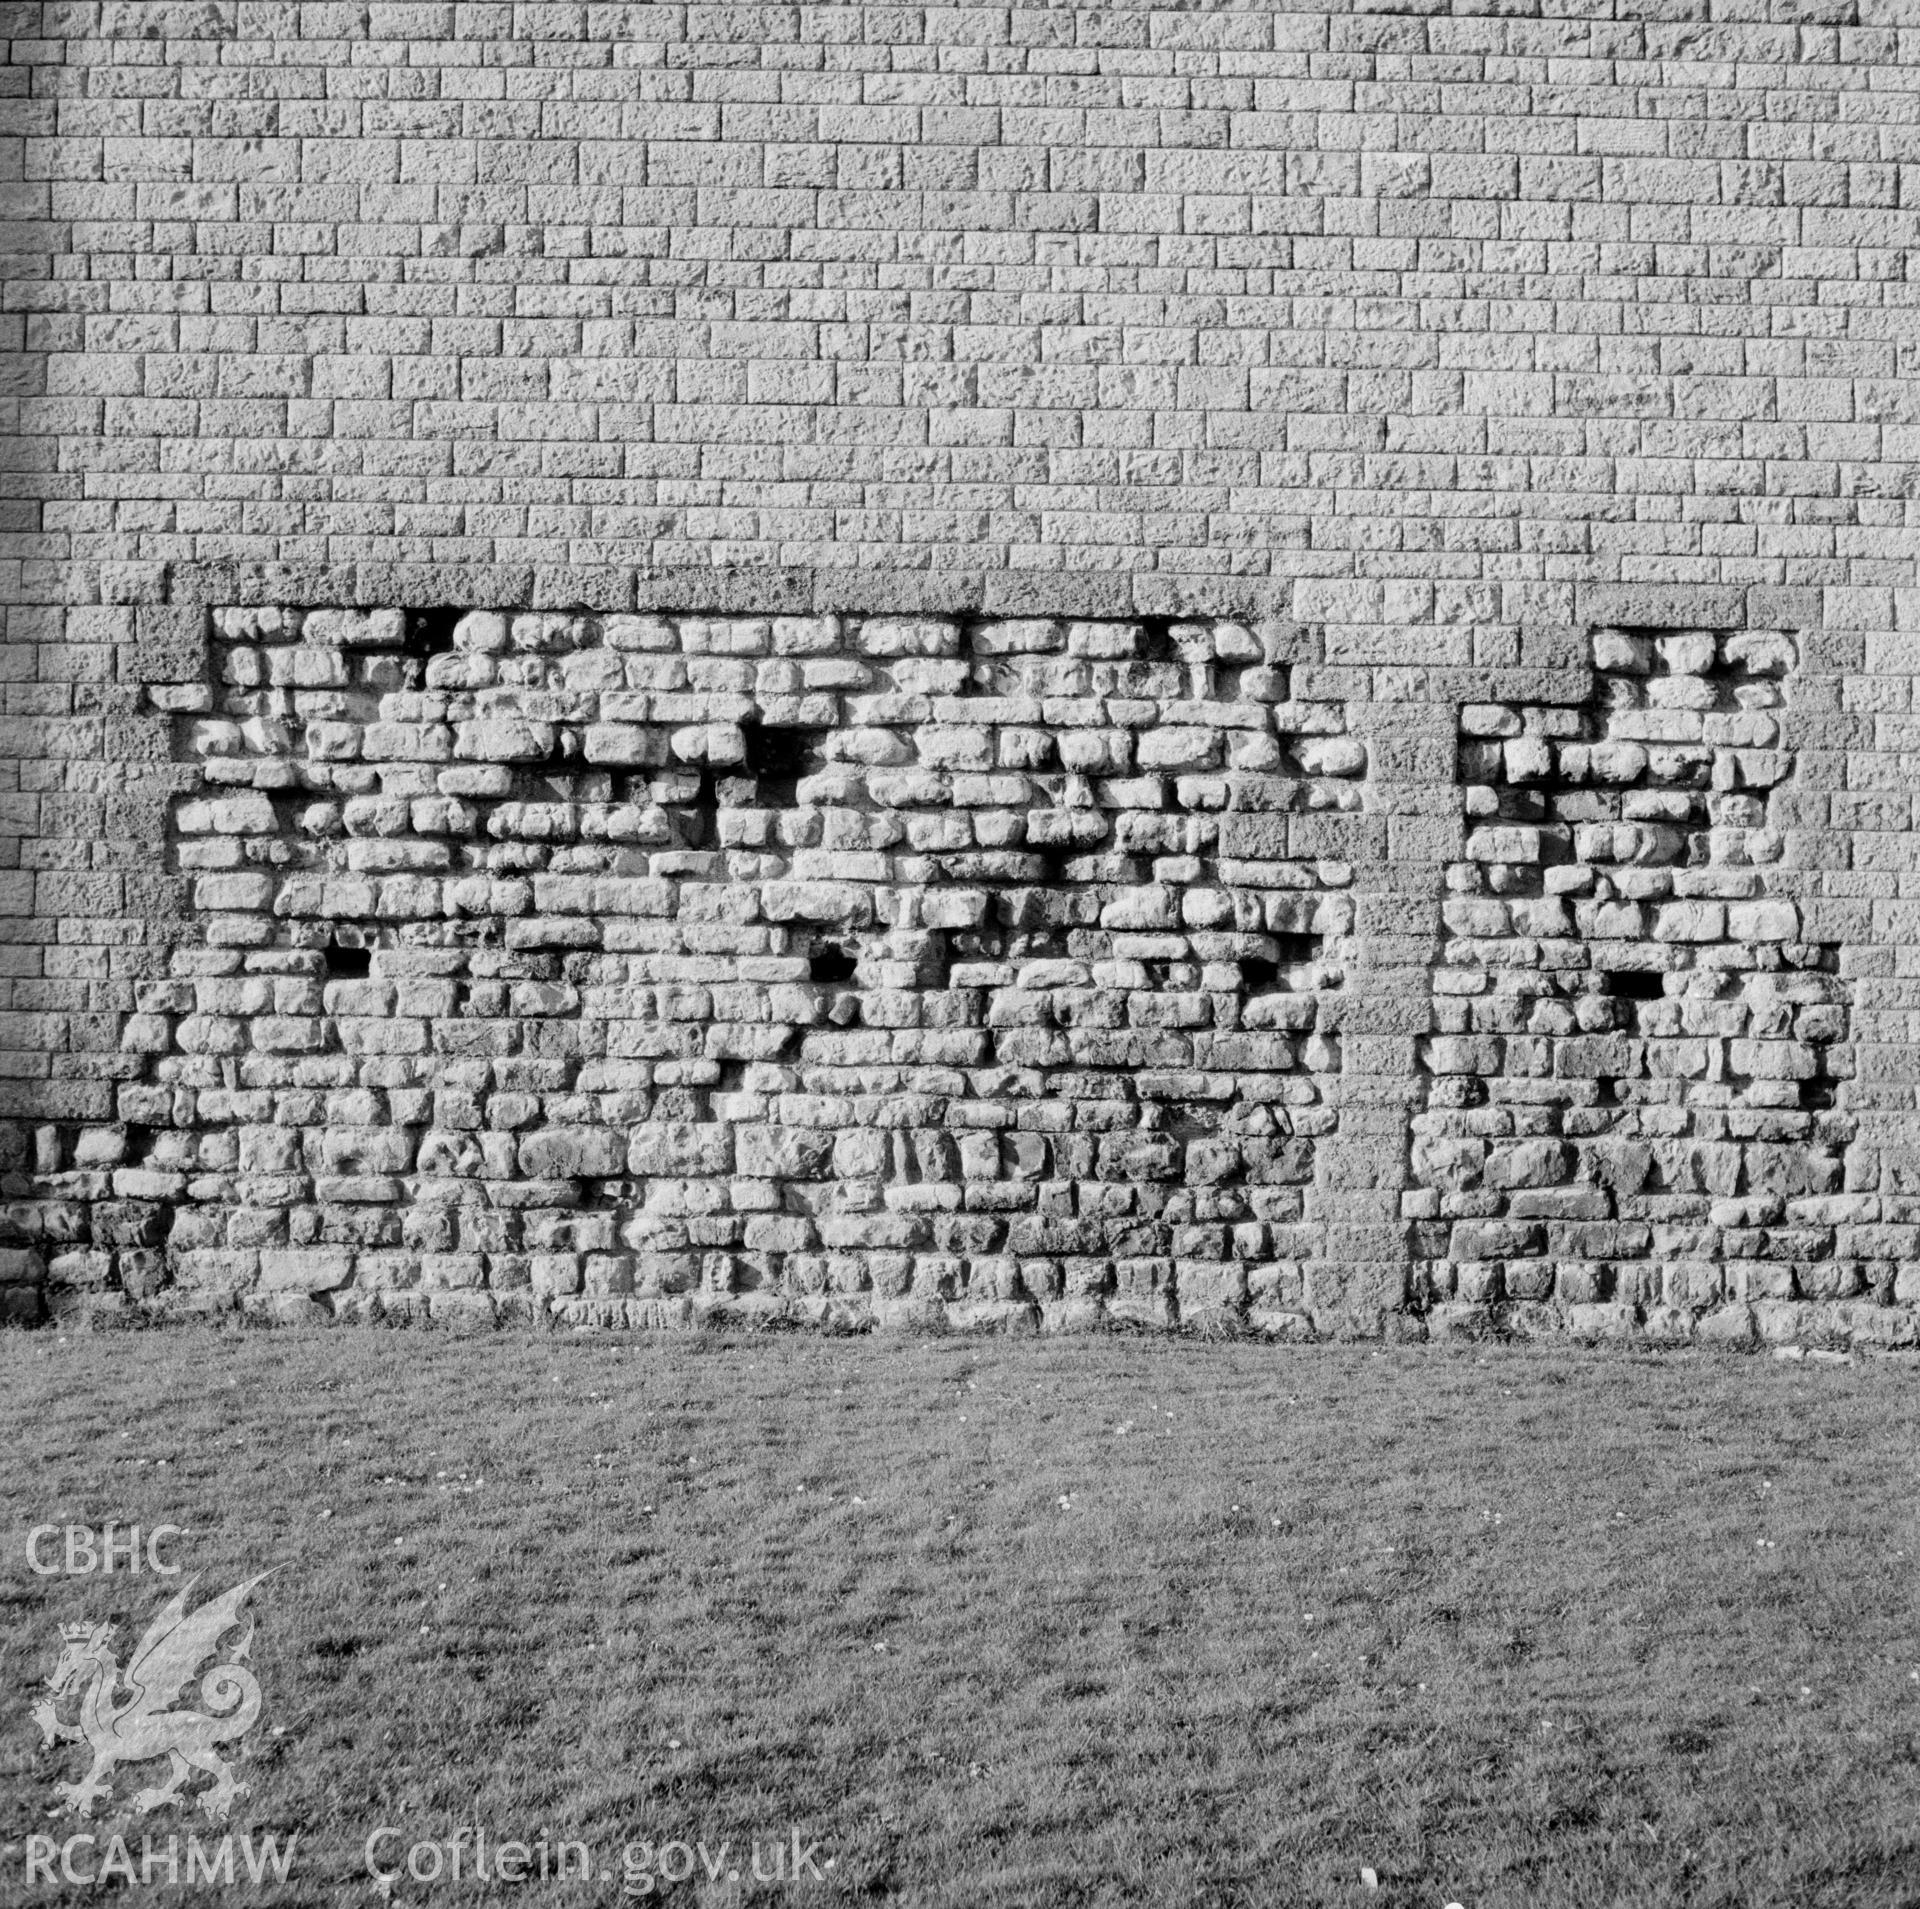 Digital copy of a black and white negative showing south wall of Cardiff Castle, taken 21st February 1966.